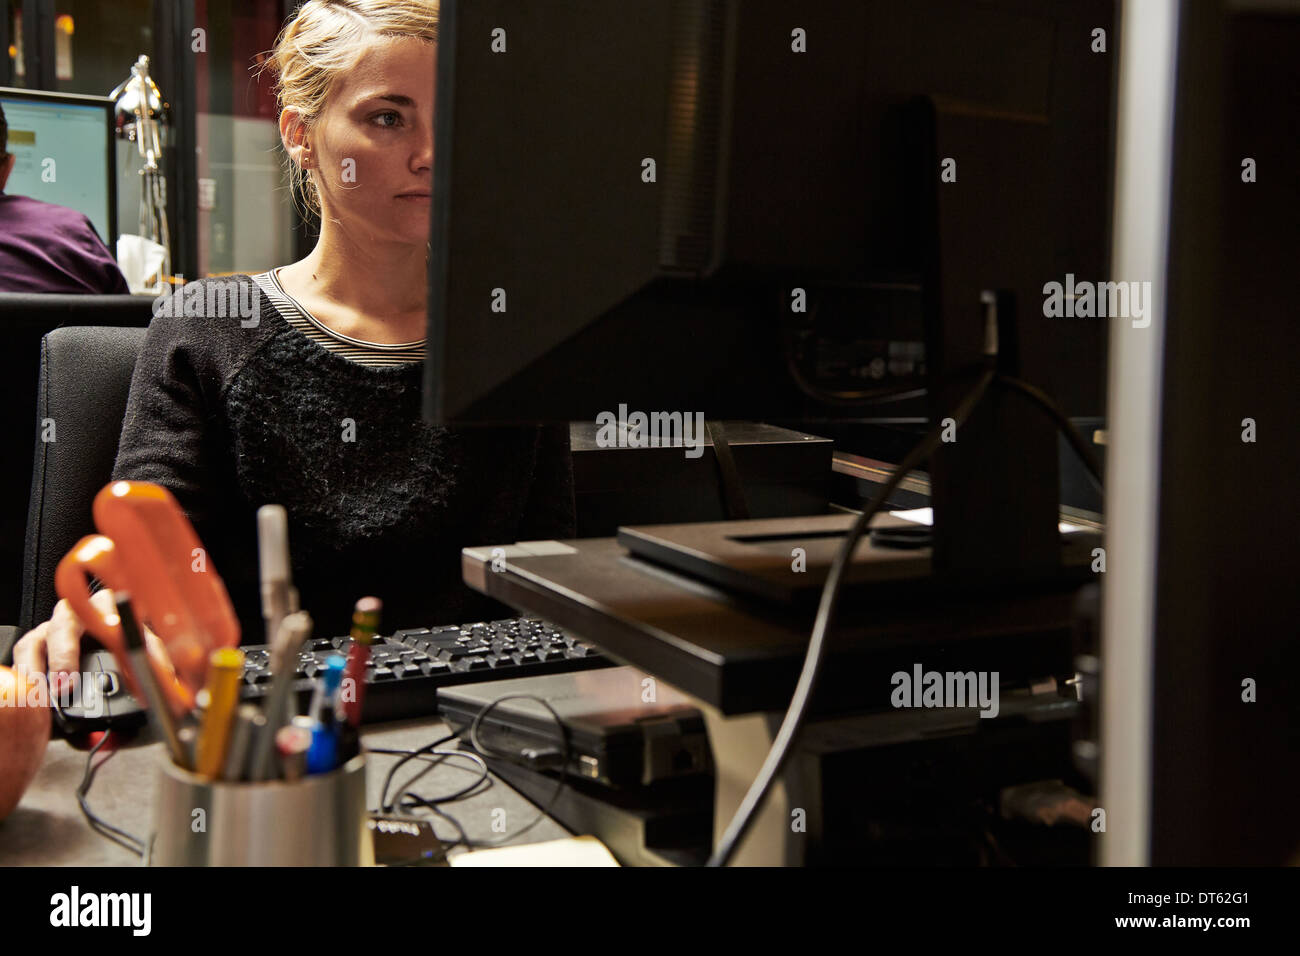 Mid adult woman using computer Stock Photo